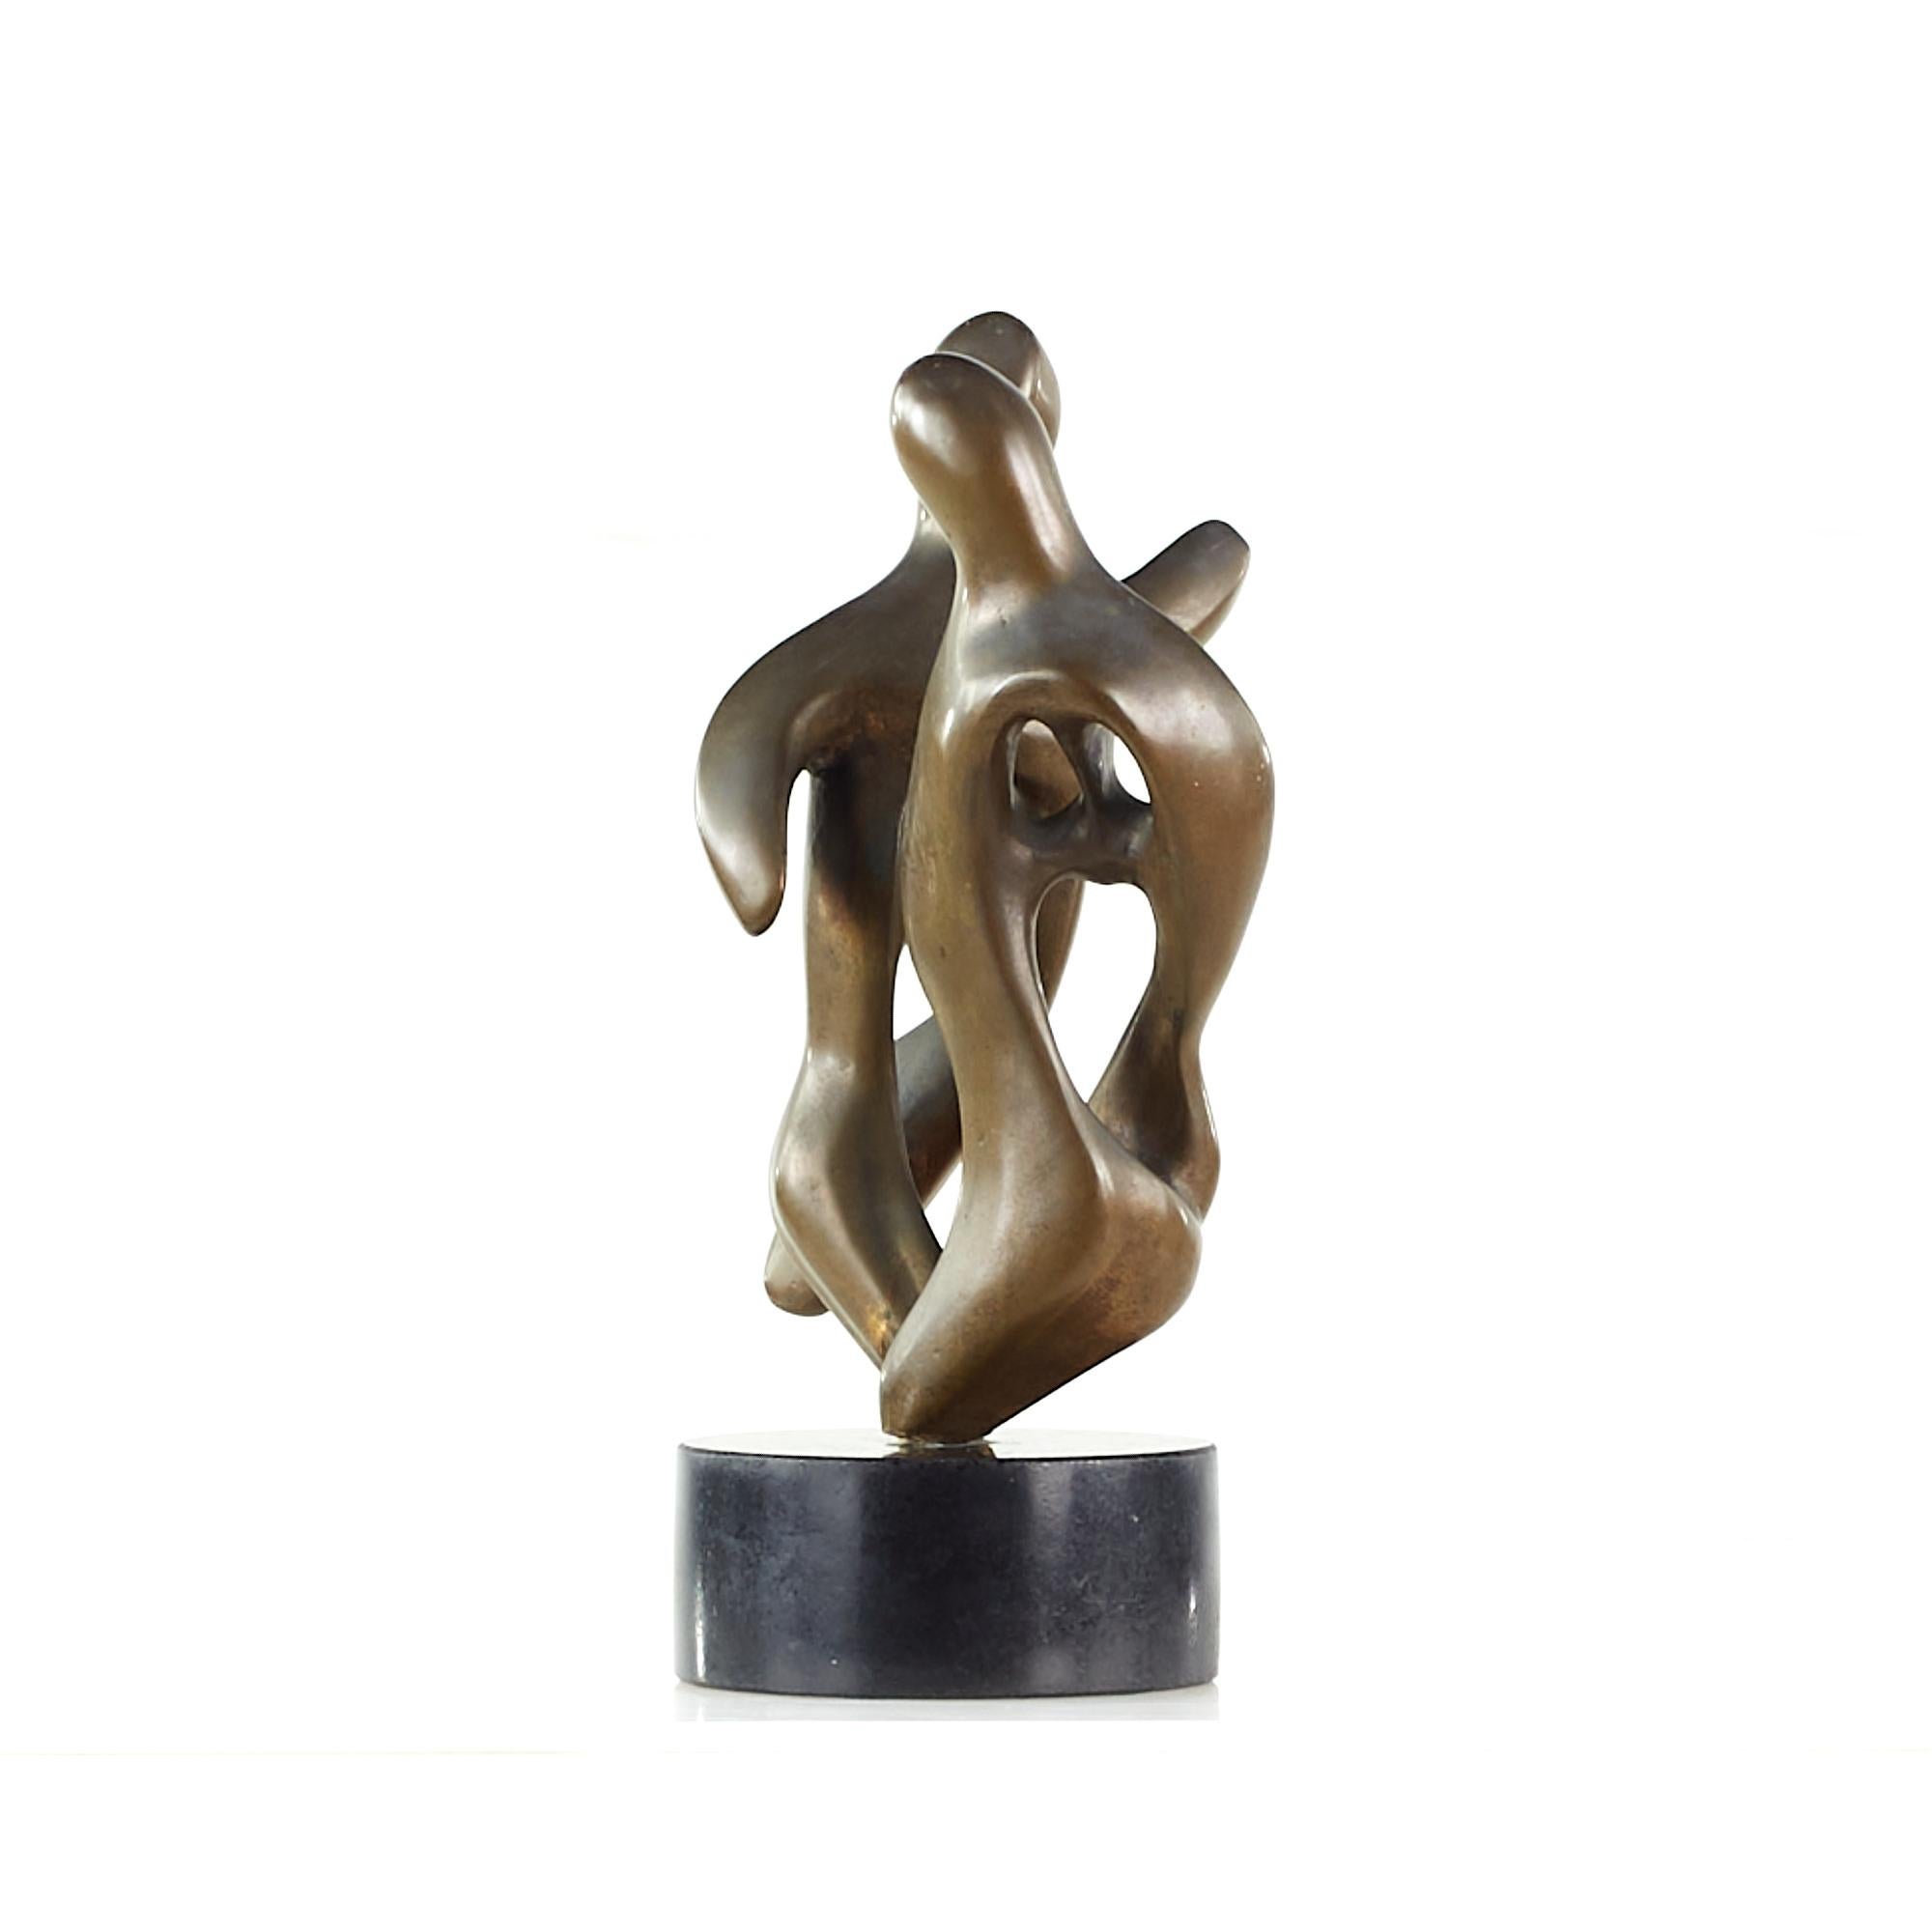 T McKinney mid century 1973 bronze abstract figures sculpture with black marble base.

This sculpture measures: 6 wide x 5 deep x 11.5 inches high

We take our photos in a controlled lighting studio to show as much detail as possible. We do not